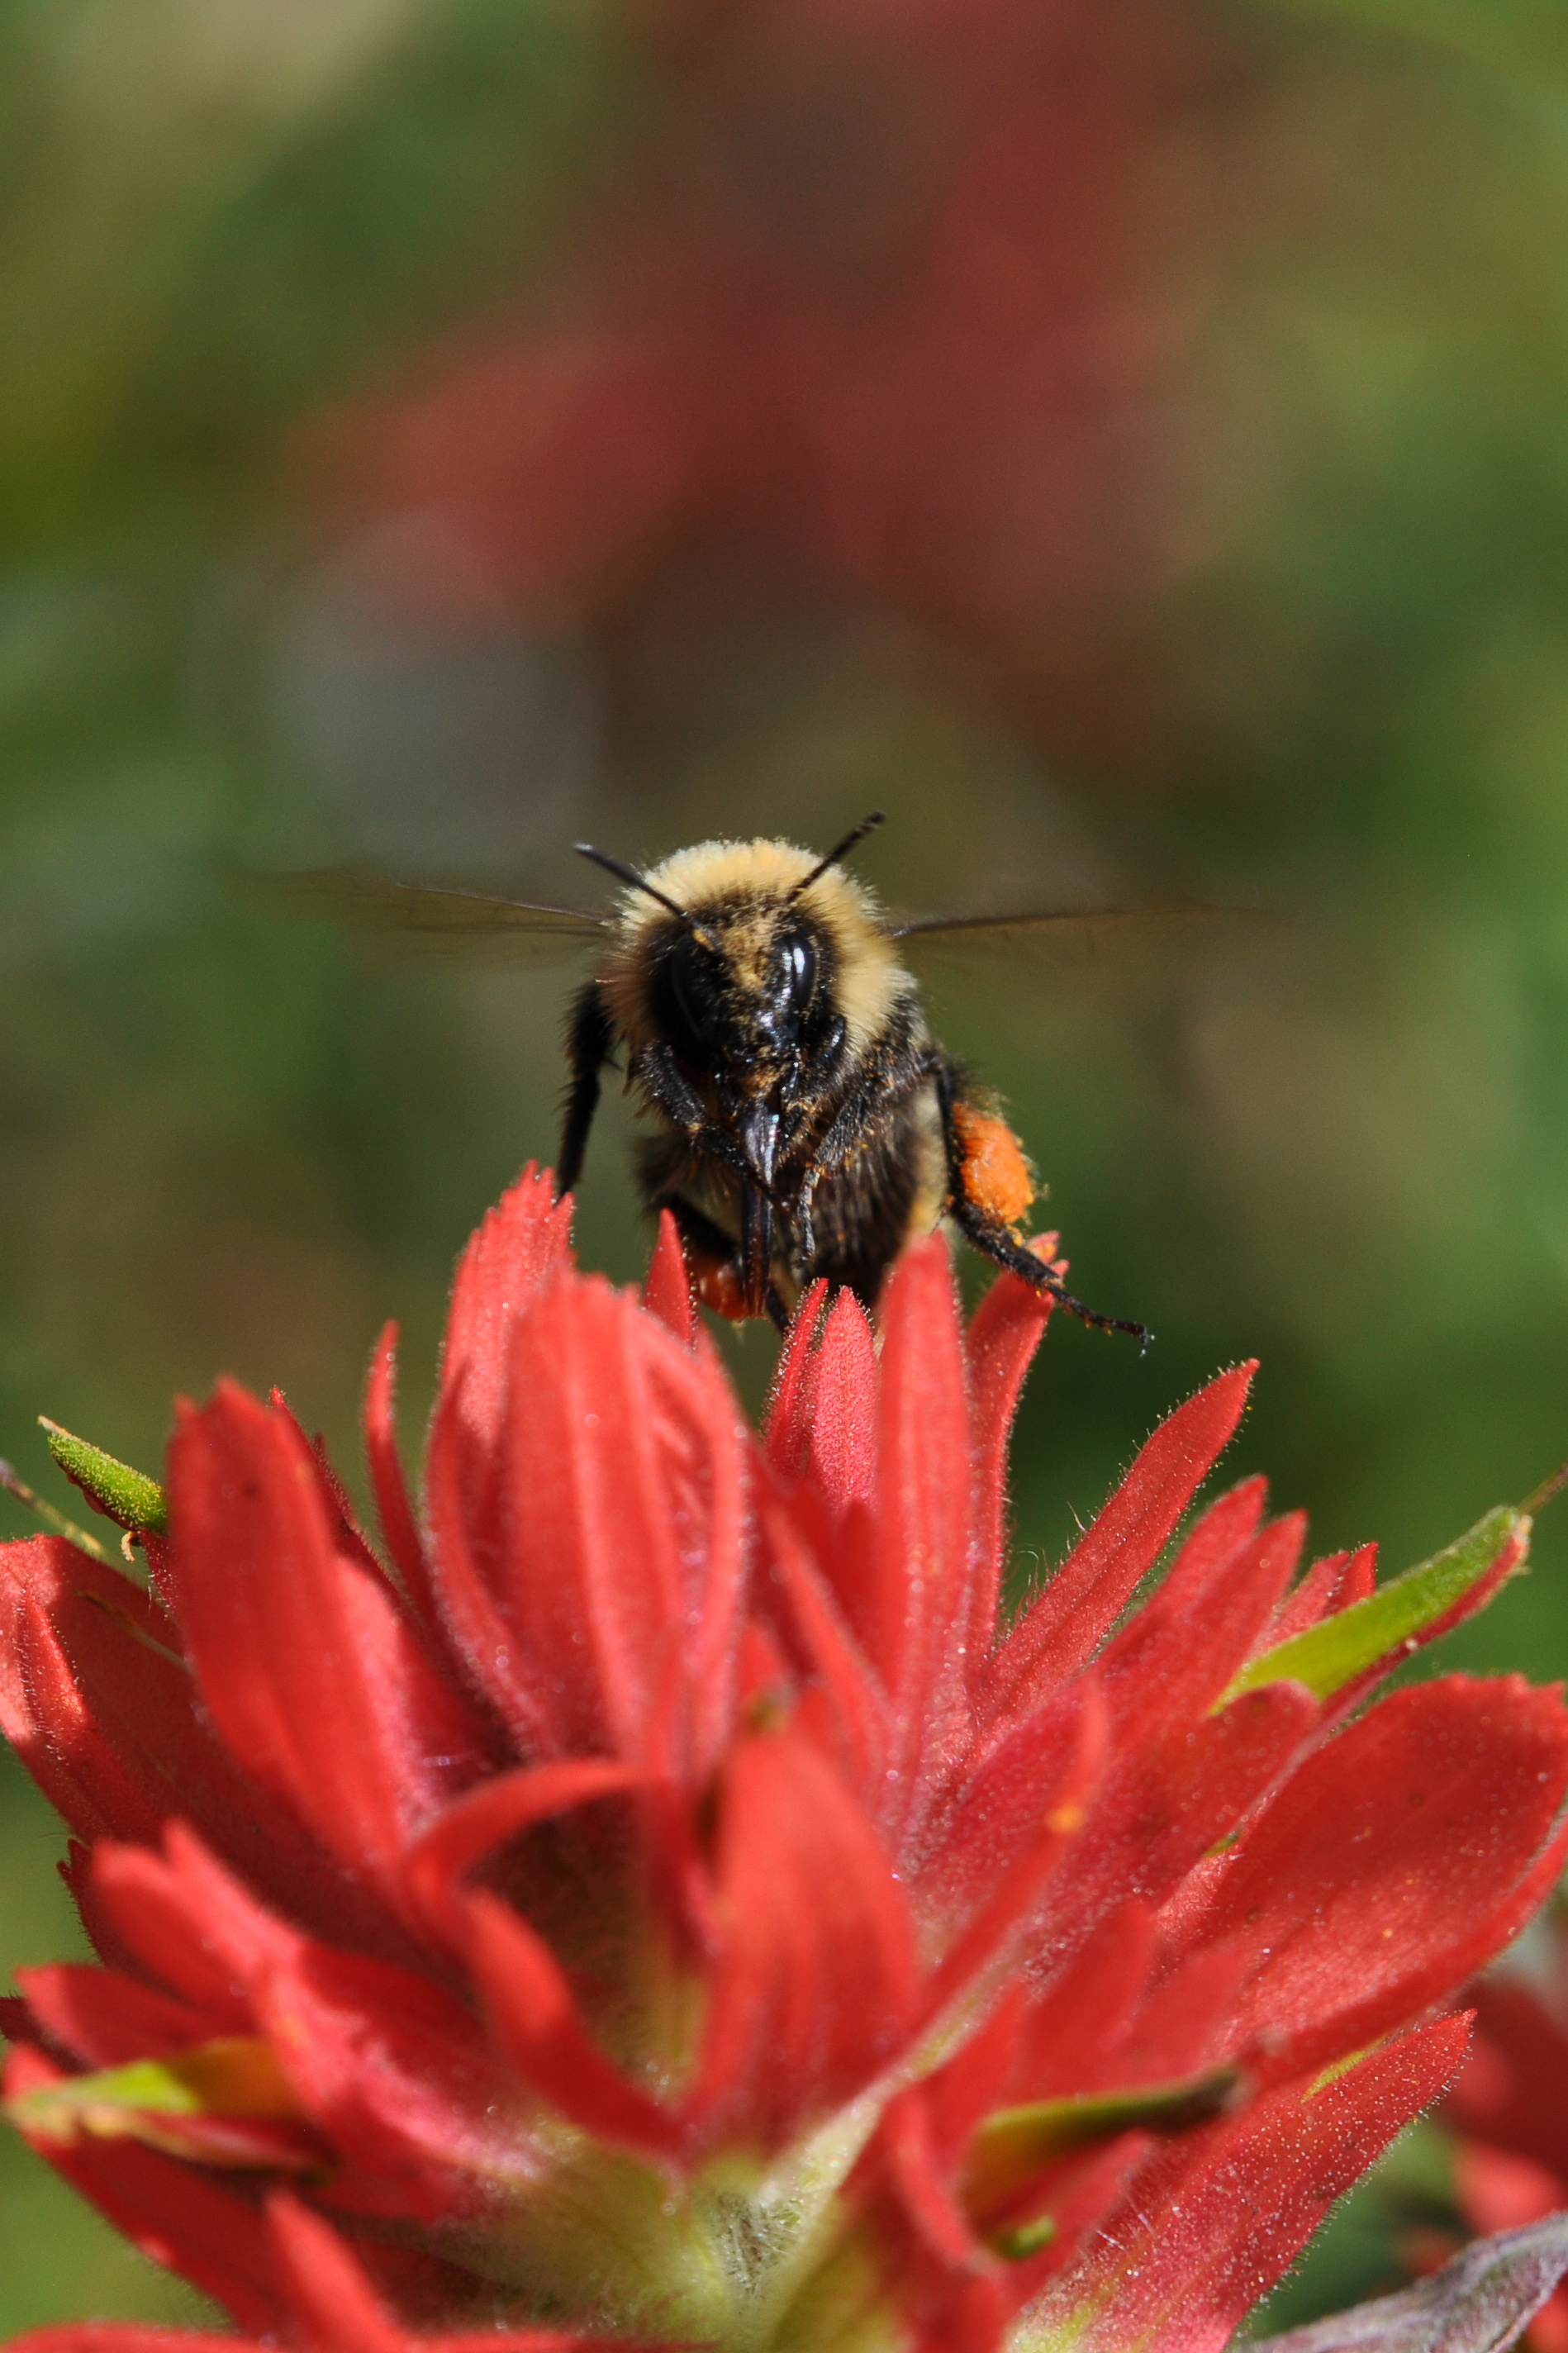 The high country bumble bee (Bombus kirbiellus) stares directly at the camera, with its wings blurred, and perched atop a red paintbrush blossom.